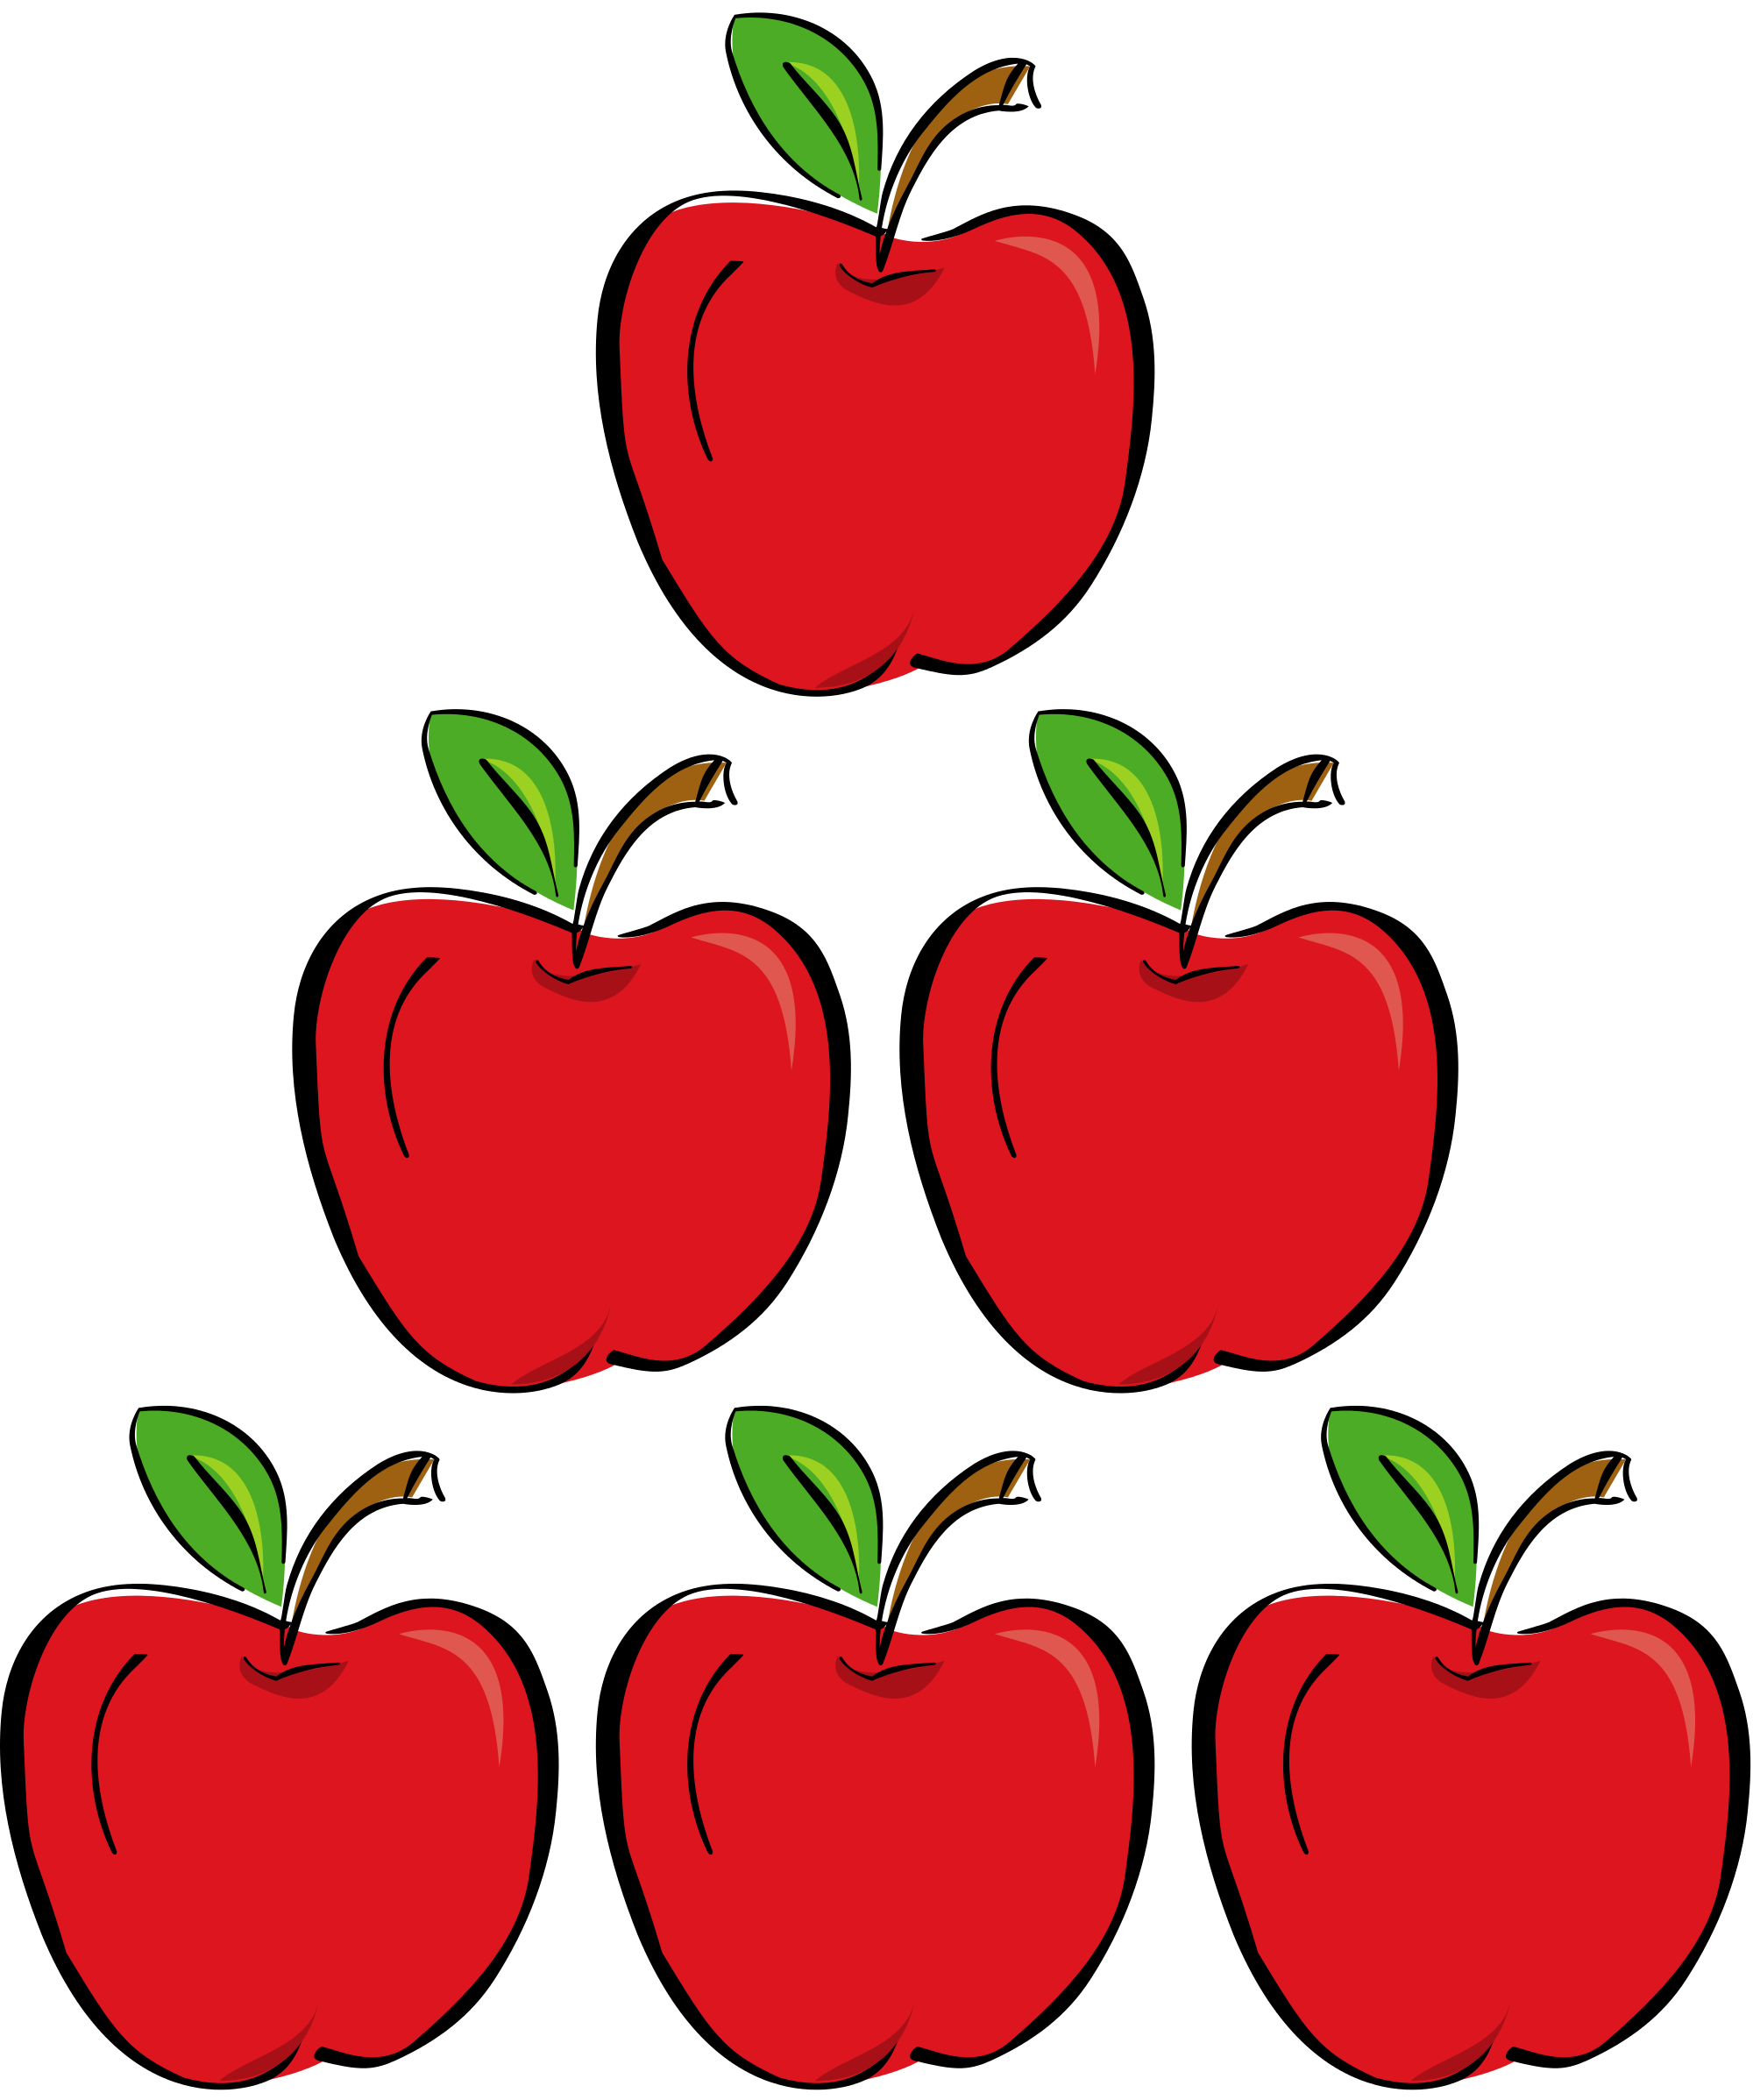 File:Three apples.svg - Wikimedia Commons